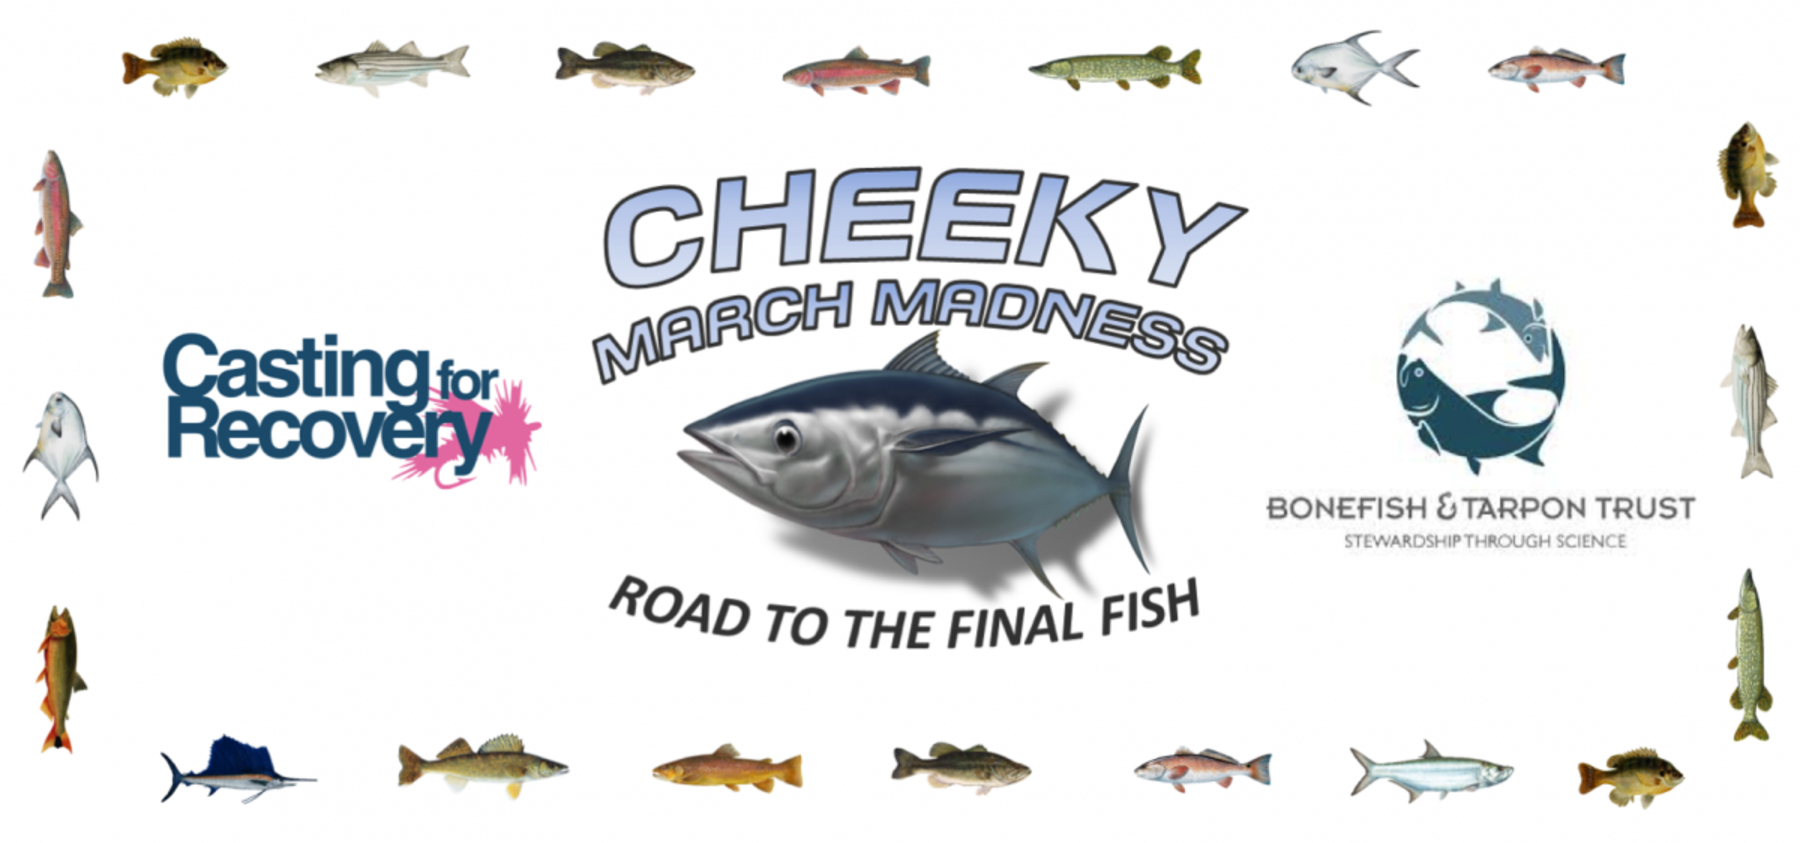 March Madness for fishermen benefits two important organizations